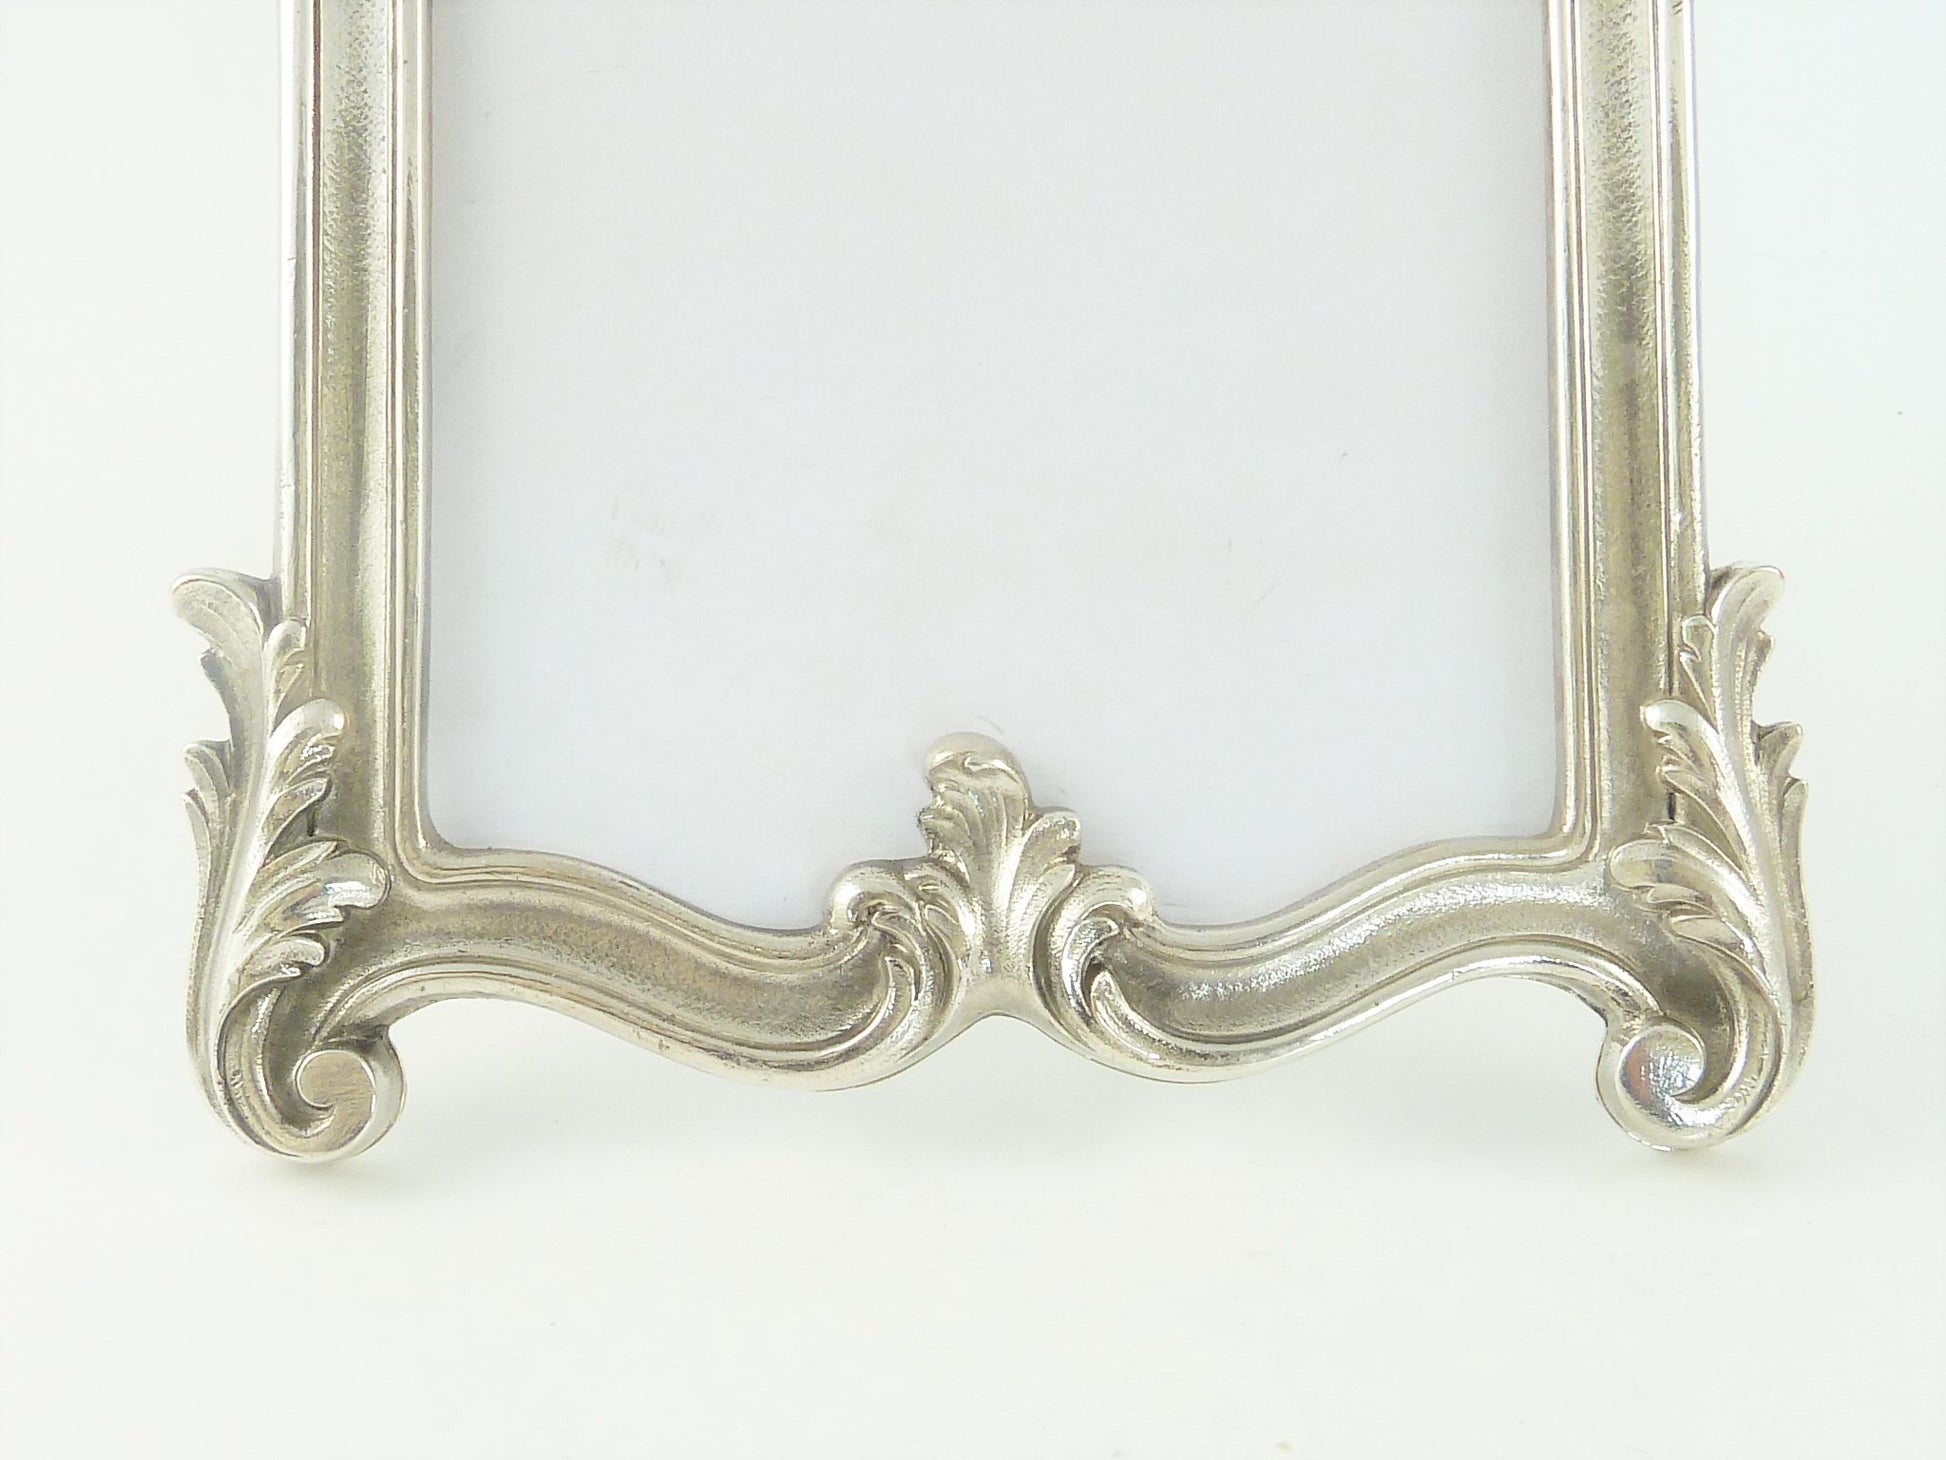 Christofle Silver Picture Photo Frame with Inset Mirror, Louis XV Style - 43 Chesapeake Court Antiques